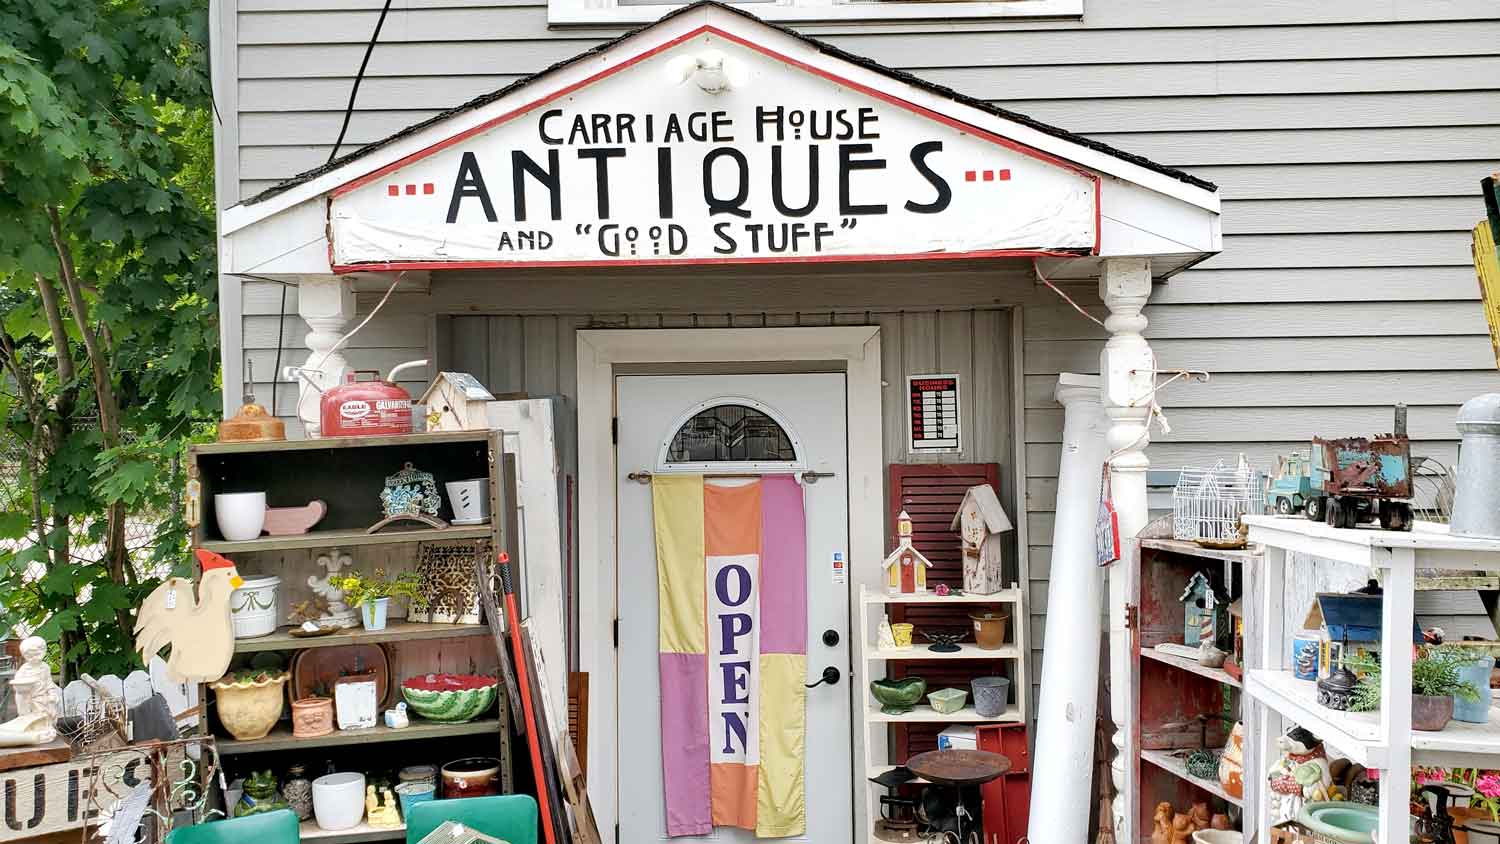 Carriage House Antiques.